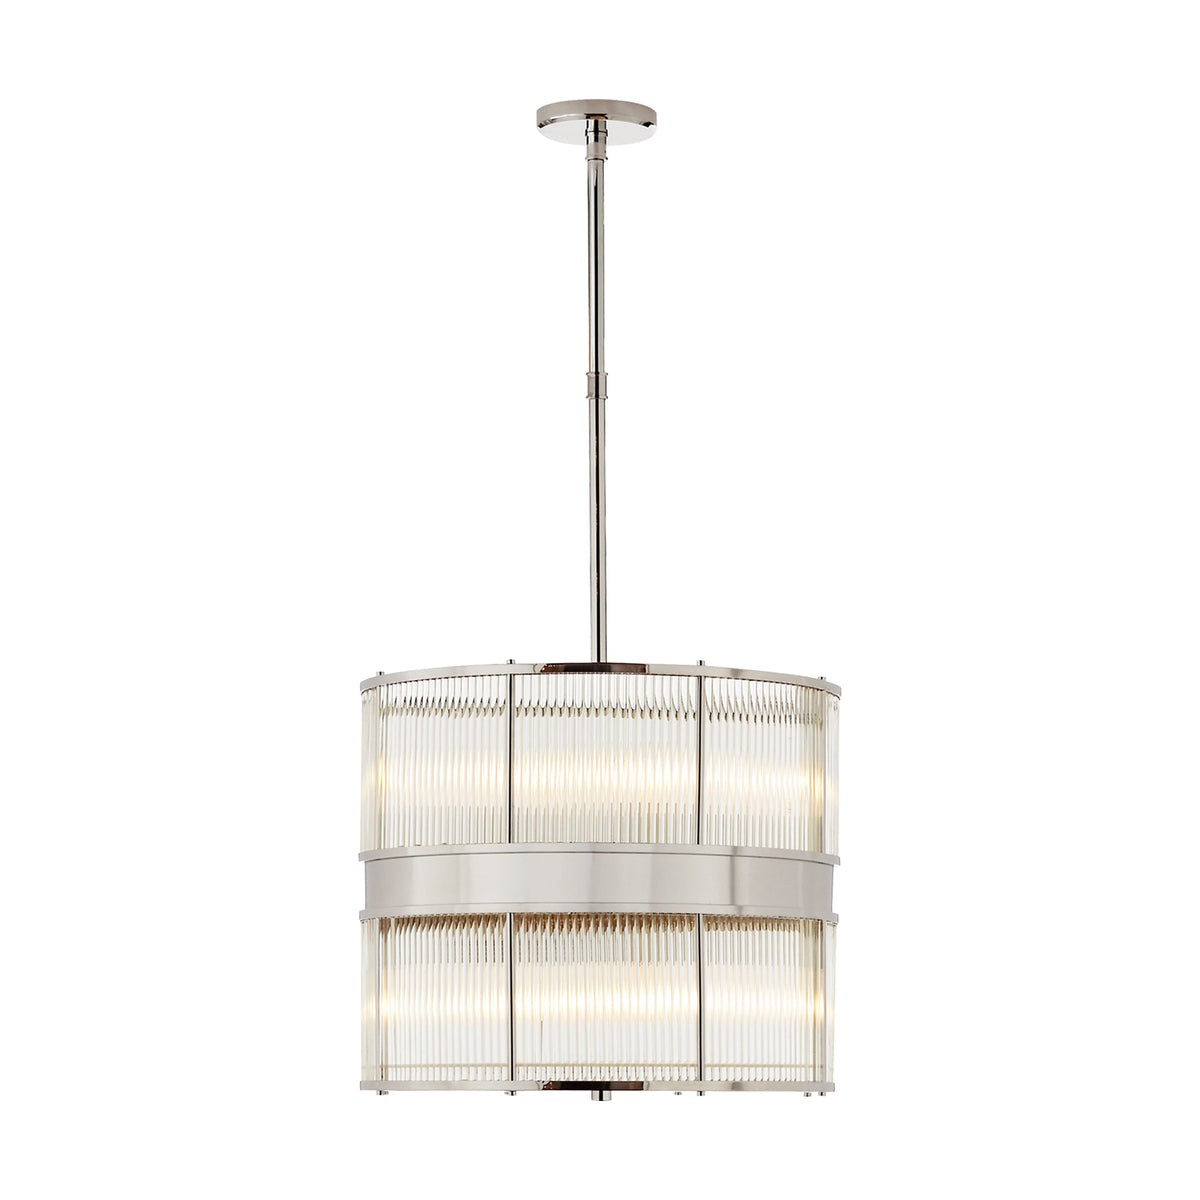 ALLEN LARGE PENDANT IN POLISHED NICKEL WITH GLASS RODS